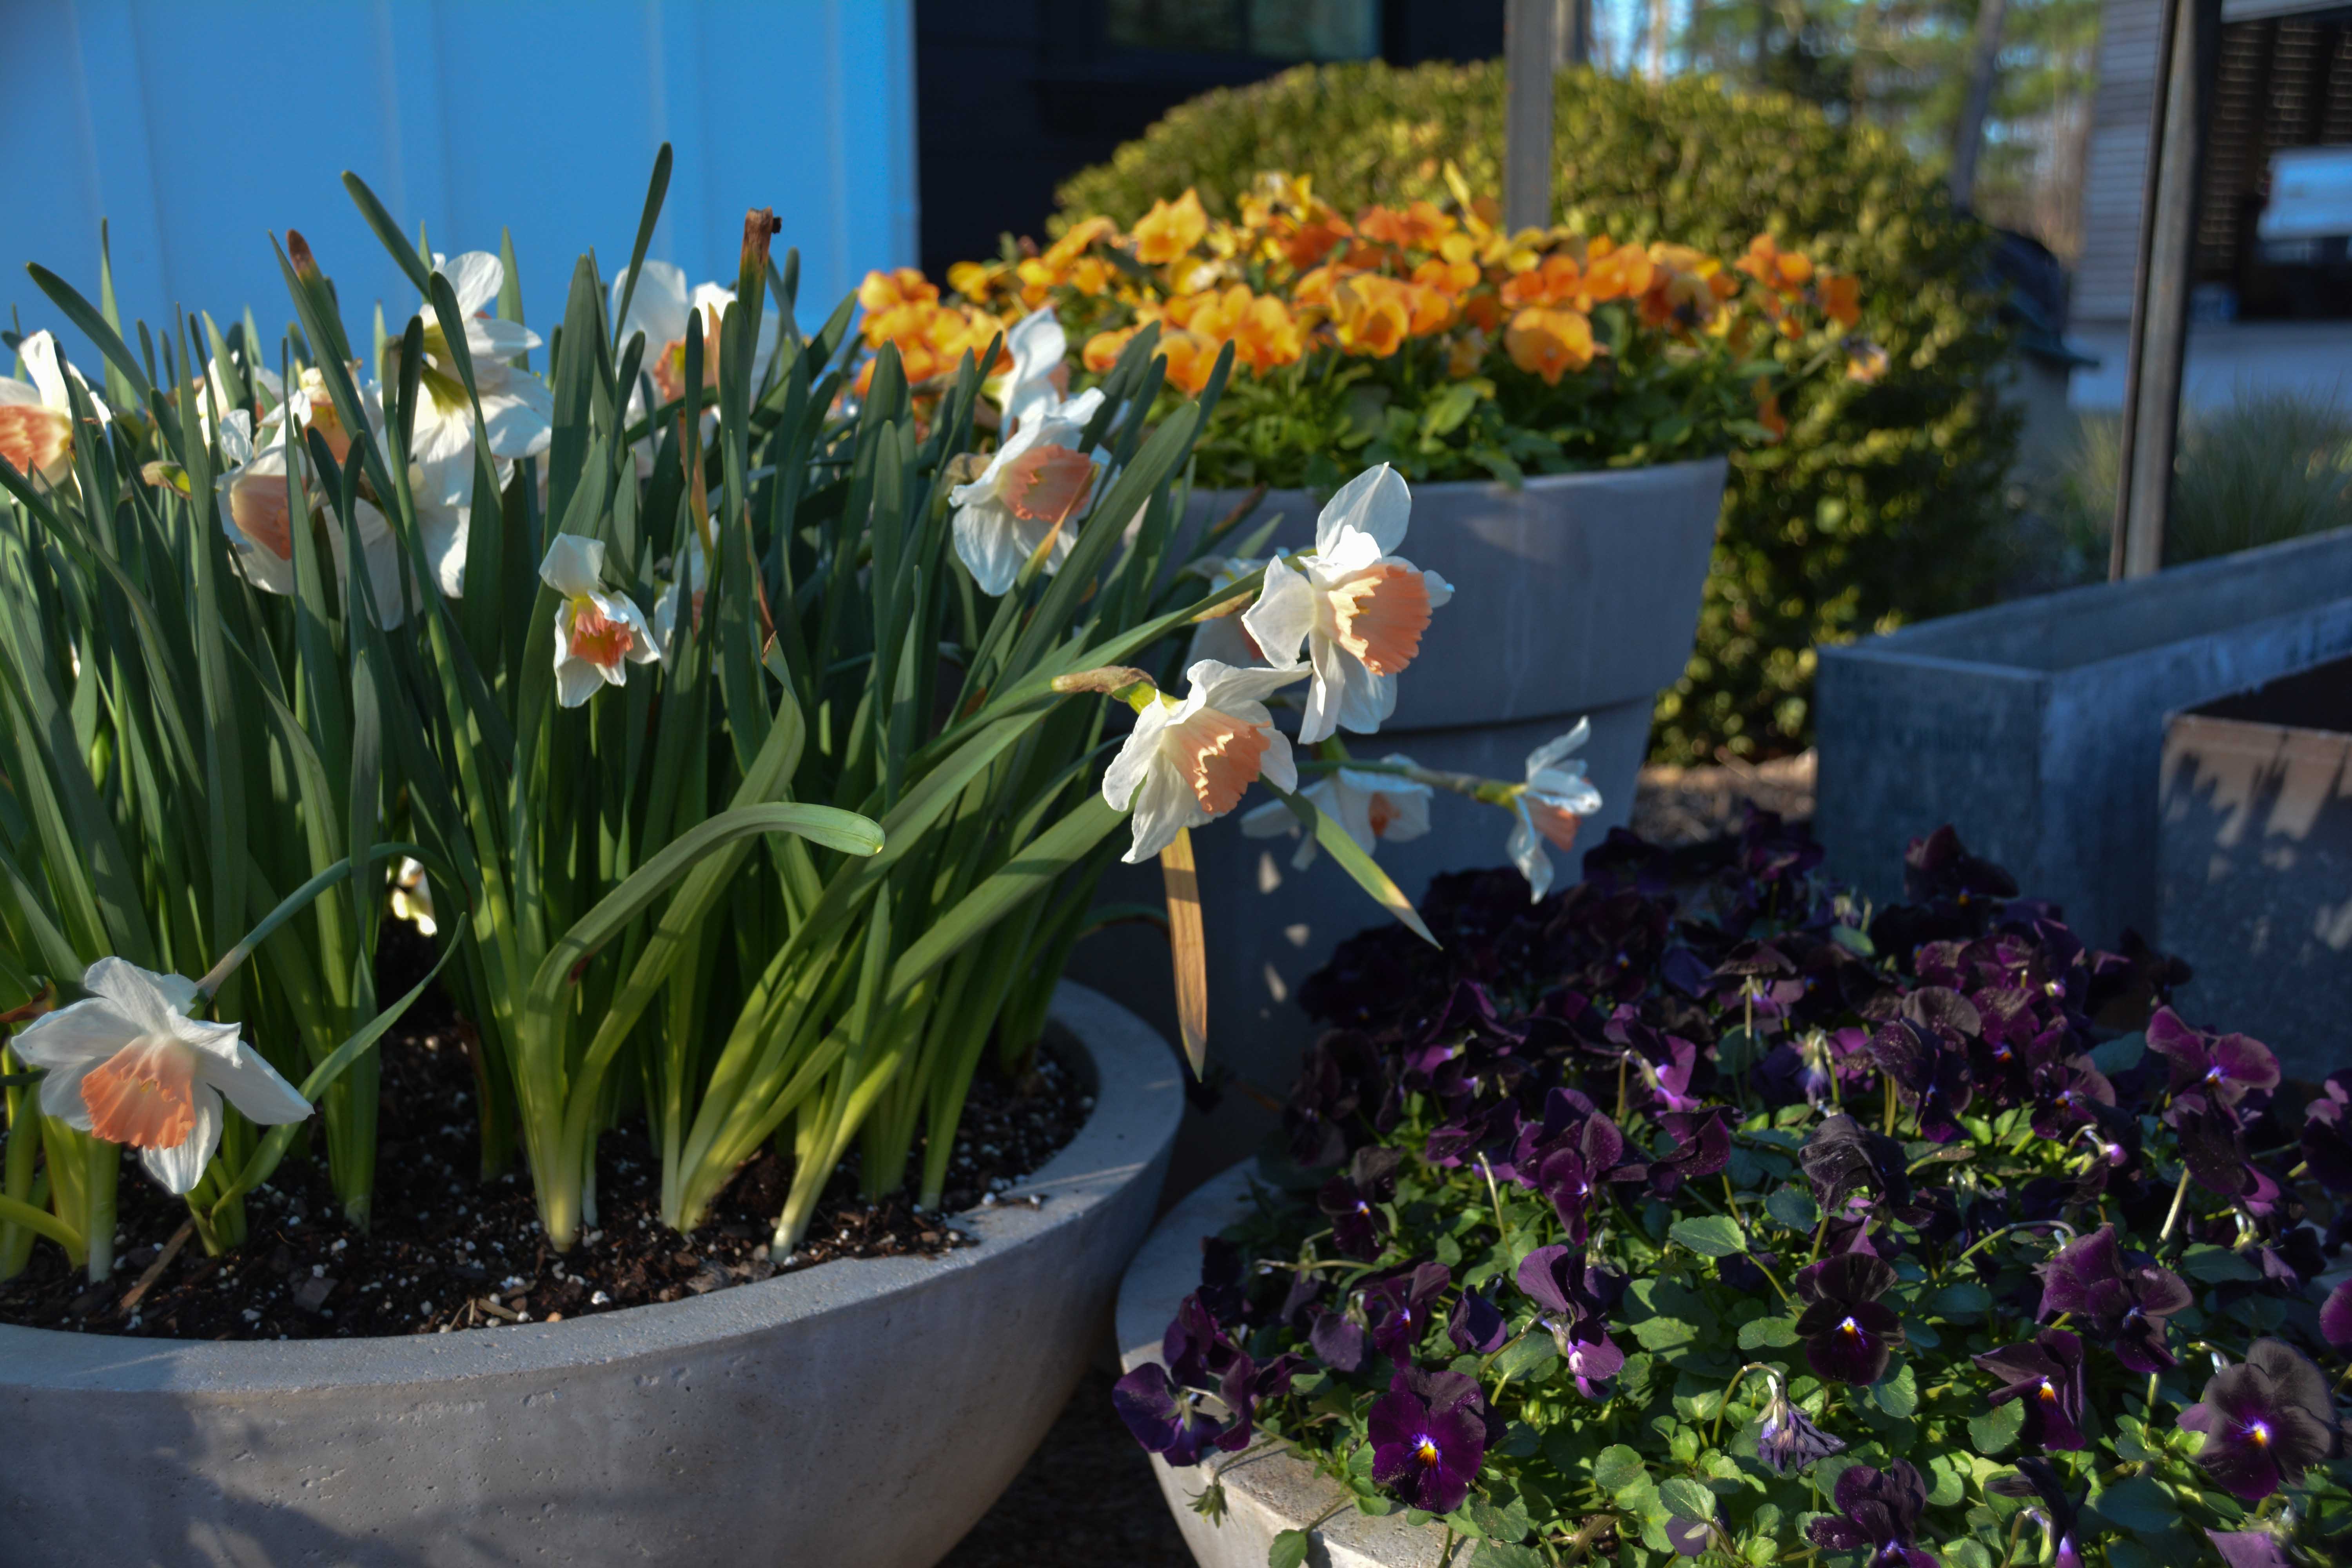 This is the easiest container design that anyone can accomplish. Here are three similar container finishes in different heights and sizes planted with daffodils and Pansies. Pansy plants are fairly inexpensive so, here two of the containers are filled with contrasting orange and purple pansies. The more expensive Narcissus 'Pink Pride' is planted in the largest container. After this bloom is complete, we have two additional containers filled with later blooming bulbs. One is filled with  Narcissus Delnashaugh and the other with Narcissus La-Torch. The mono-pot design allows us to swap out the container of bulbs, while the pansies will flourish during the whole period and will work with all three daffodil colors. thinkingoutsidetheboxwood.com